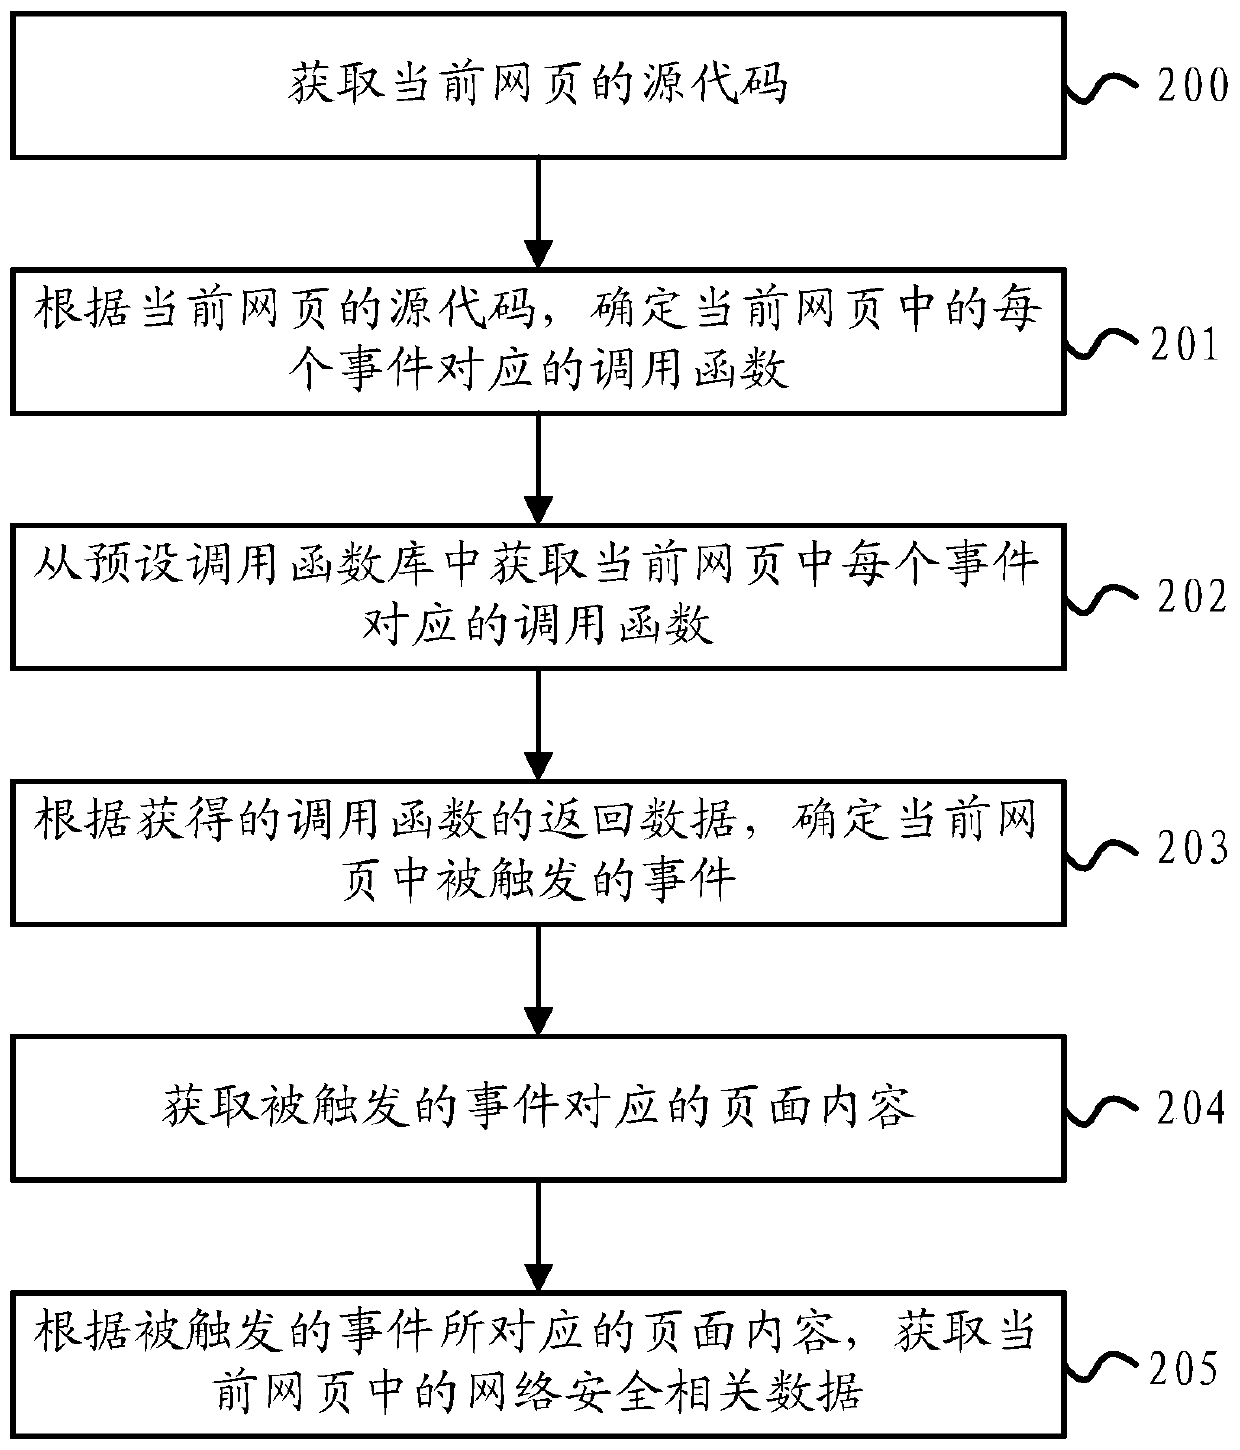 Method and device for obtaining network security data